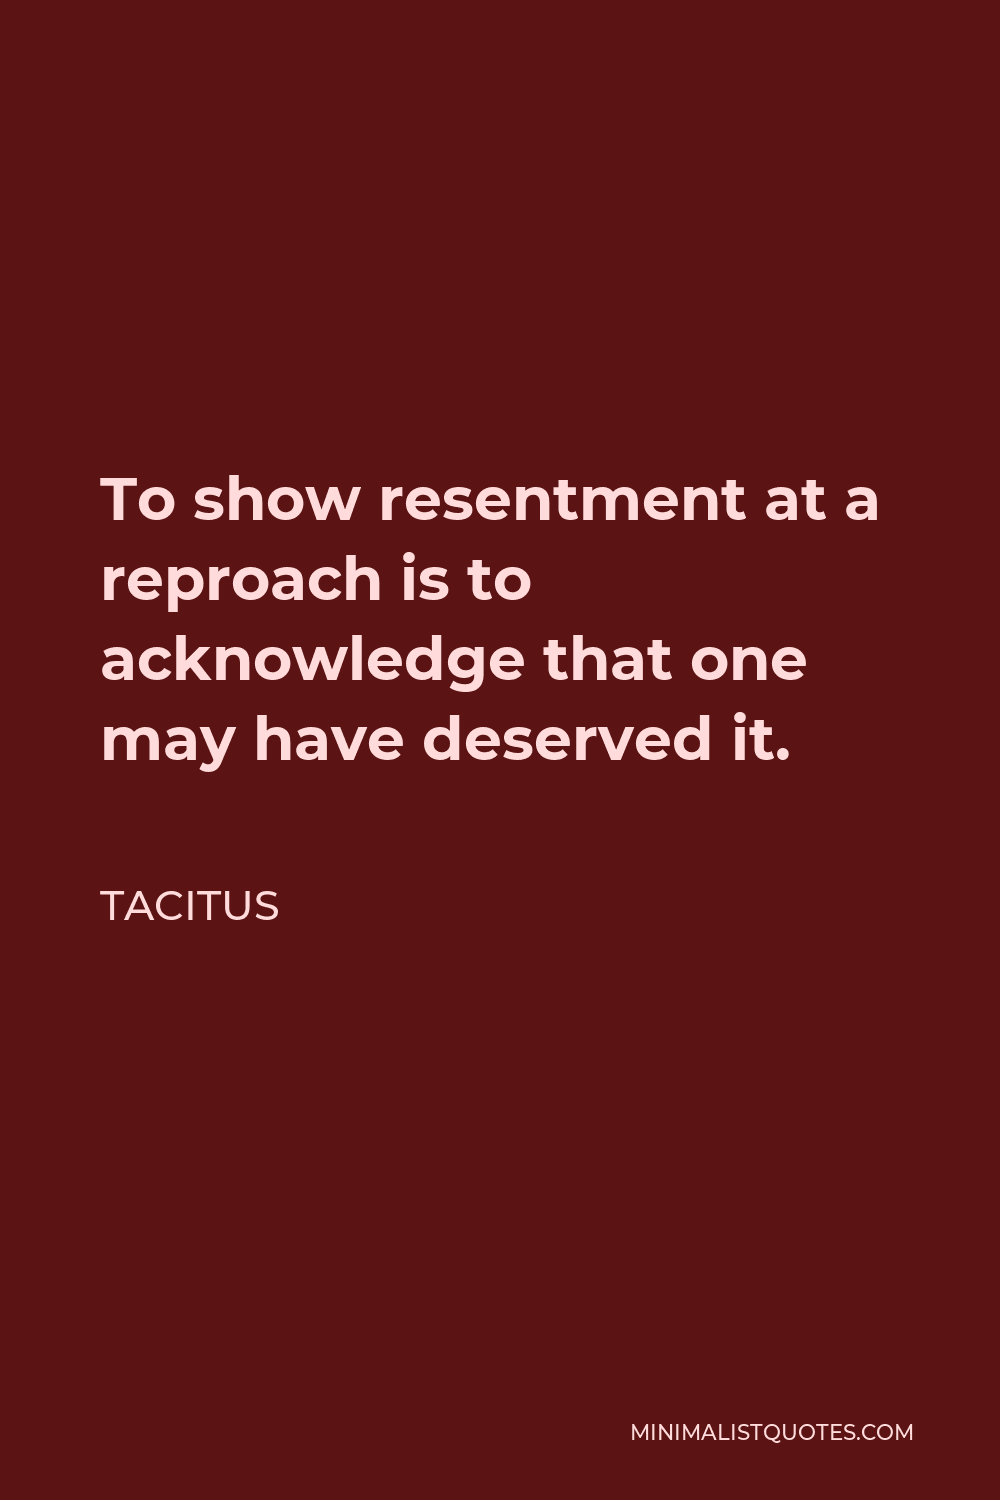 Tacitus Quote - To show resentment at a reproach is to acknowledge that one may have deserved it.